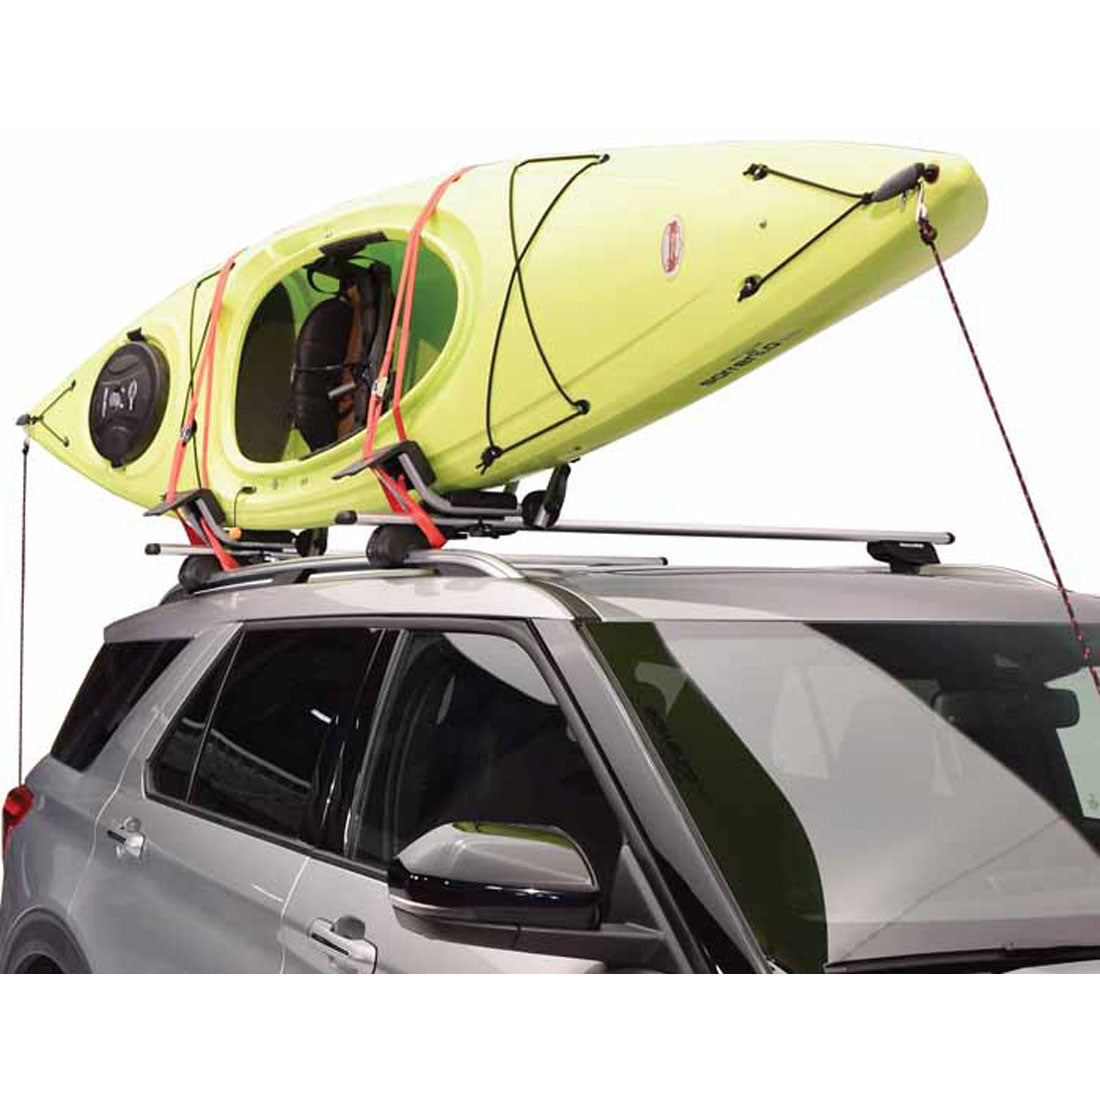 Malone Downloader Kayak Roof Rack installed on an SUV